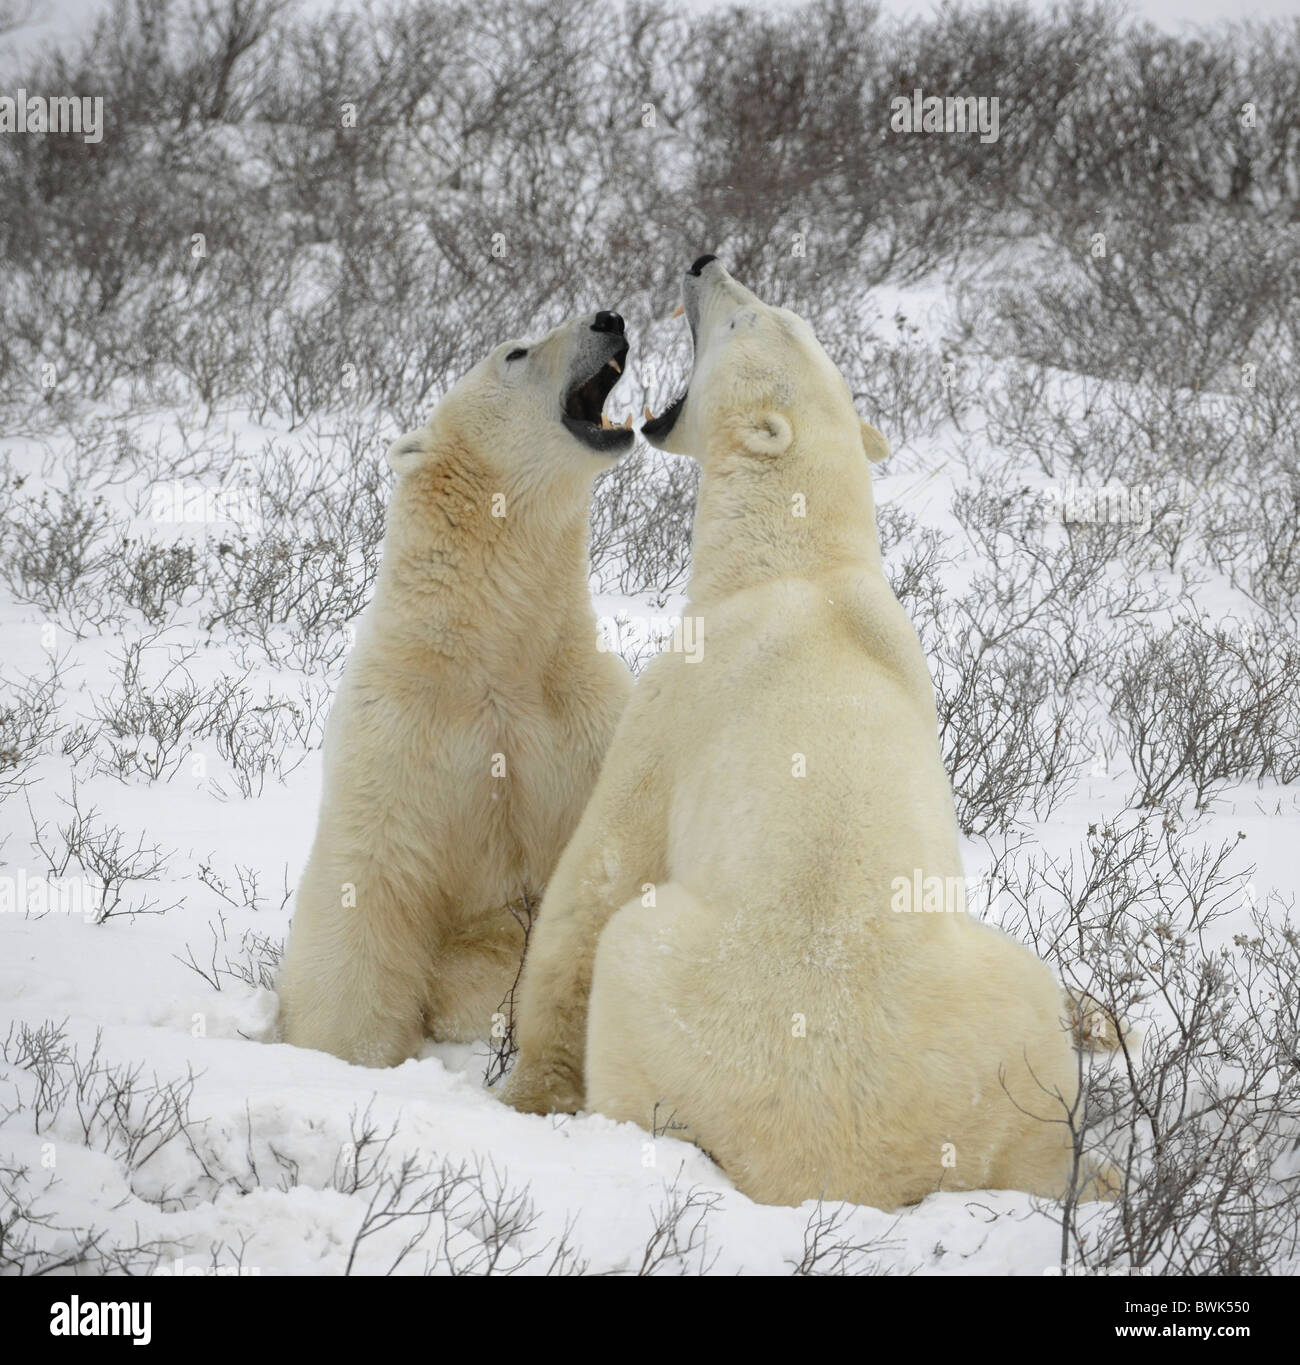 Two polar bears are measured in the size to graze.Tundra. Snow. Stock Photo